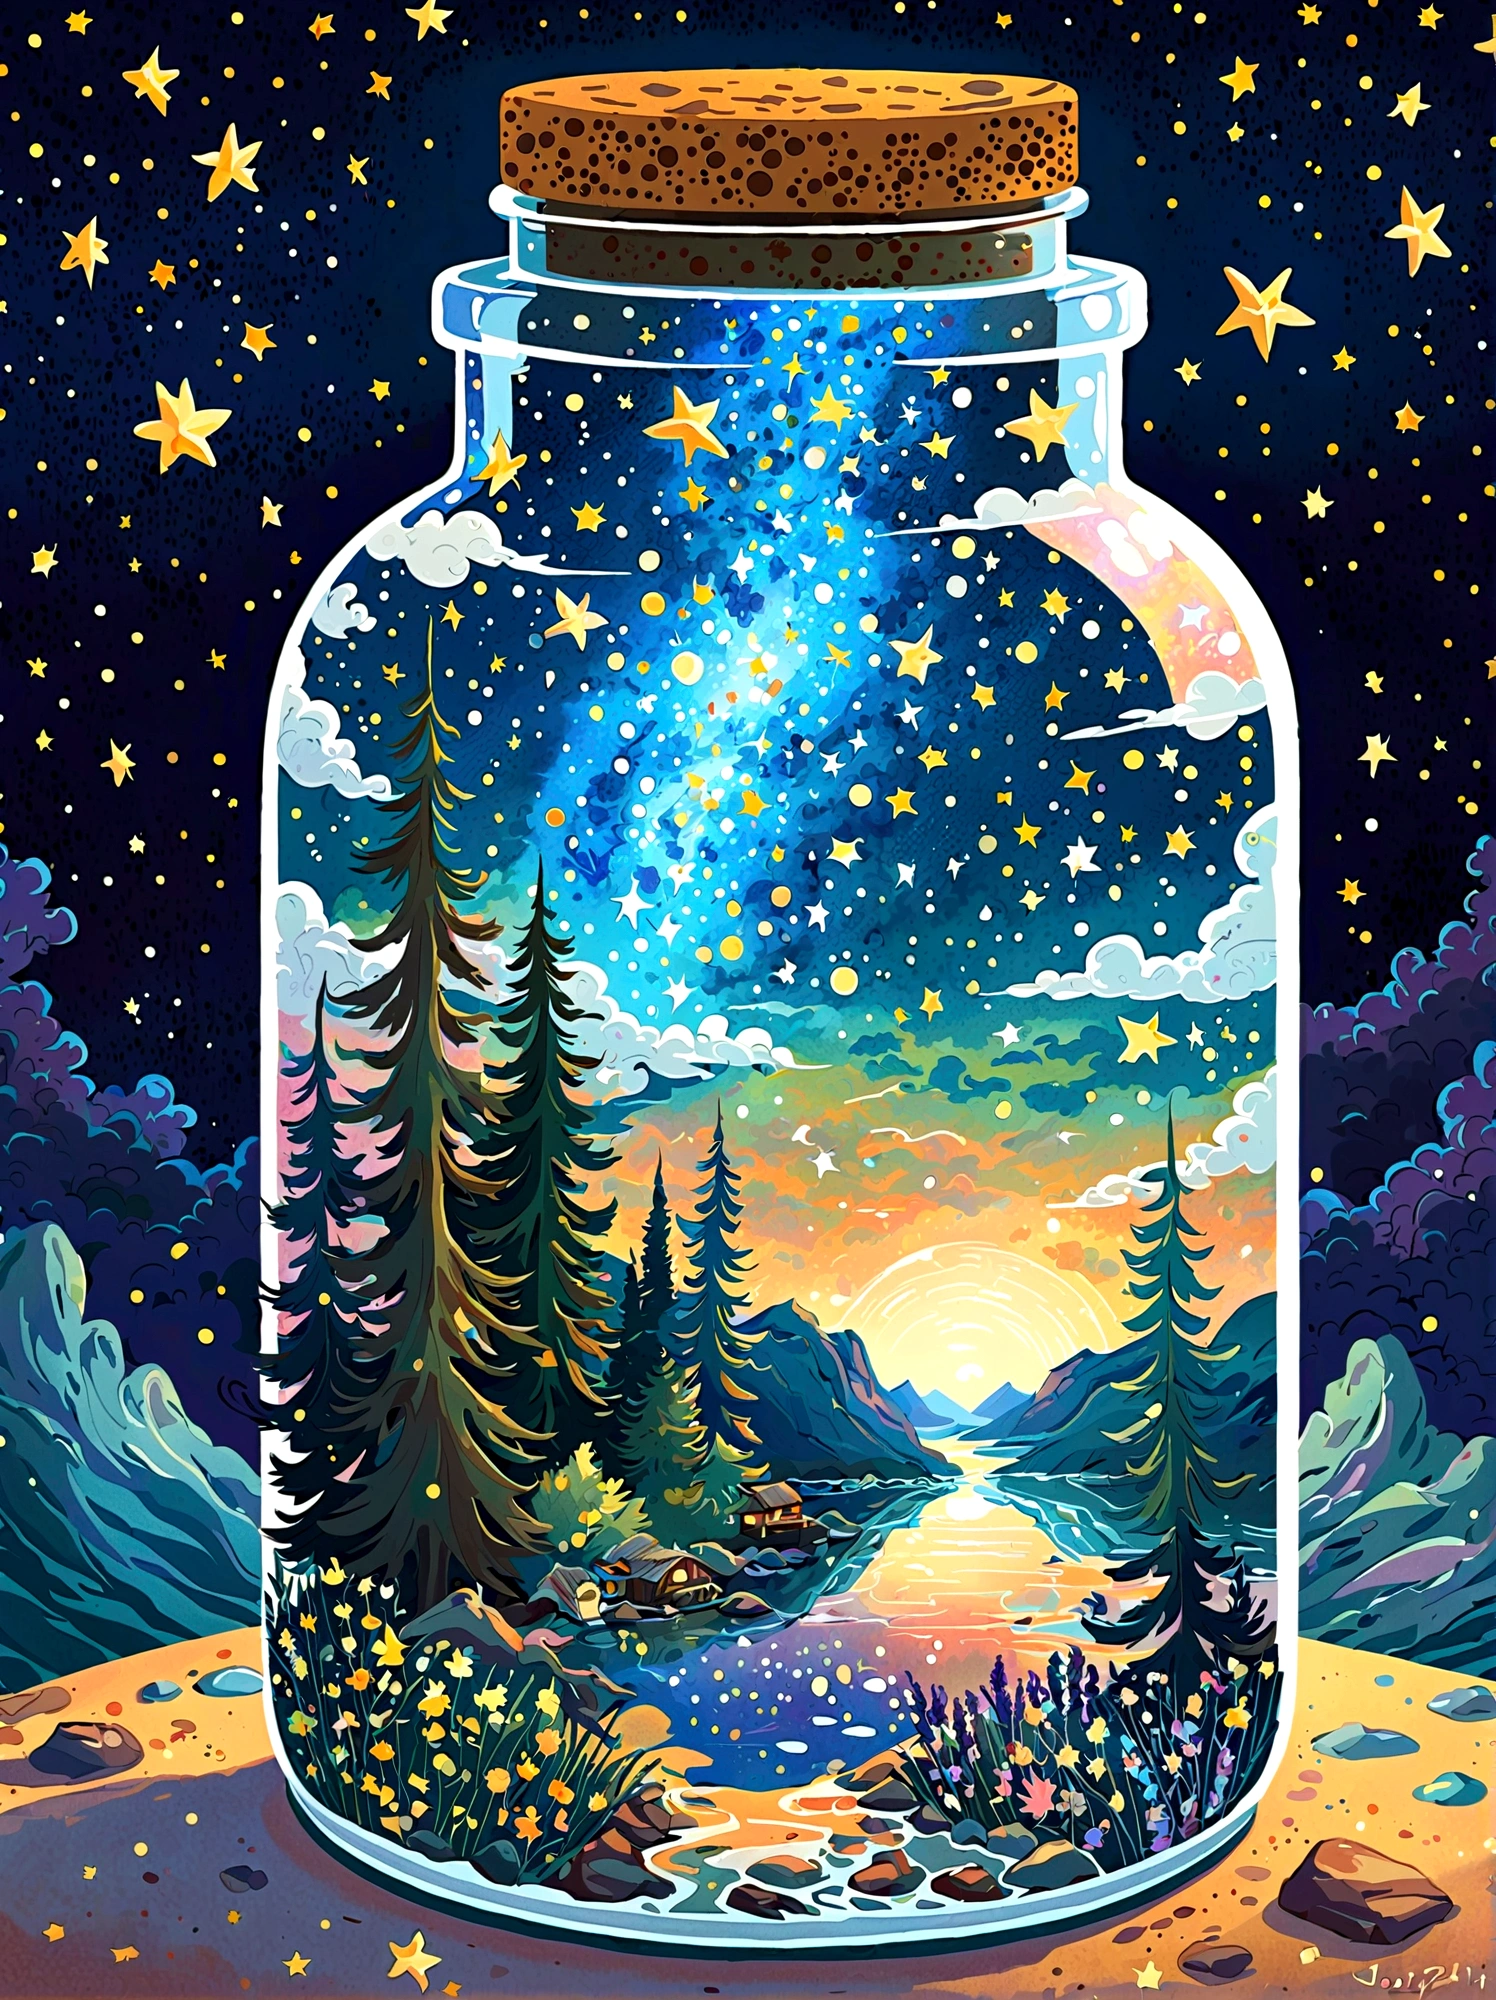 1pzsj1, Masterpiece，Top quality，(Very delicate and beautiful starry sky scenery trapped in a jar), world masterpiece theater, High resolution isometric, Top quality, illustration, Thick coating, canvas, painting, realism, Realism